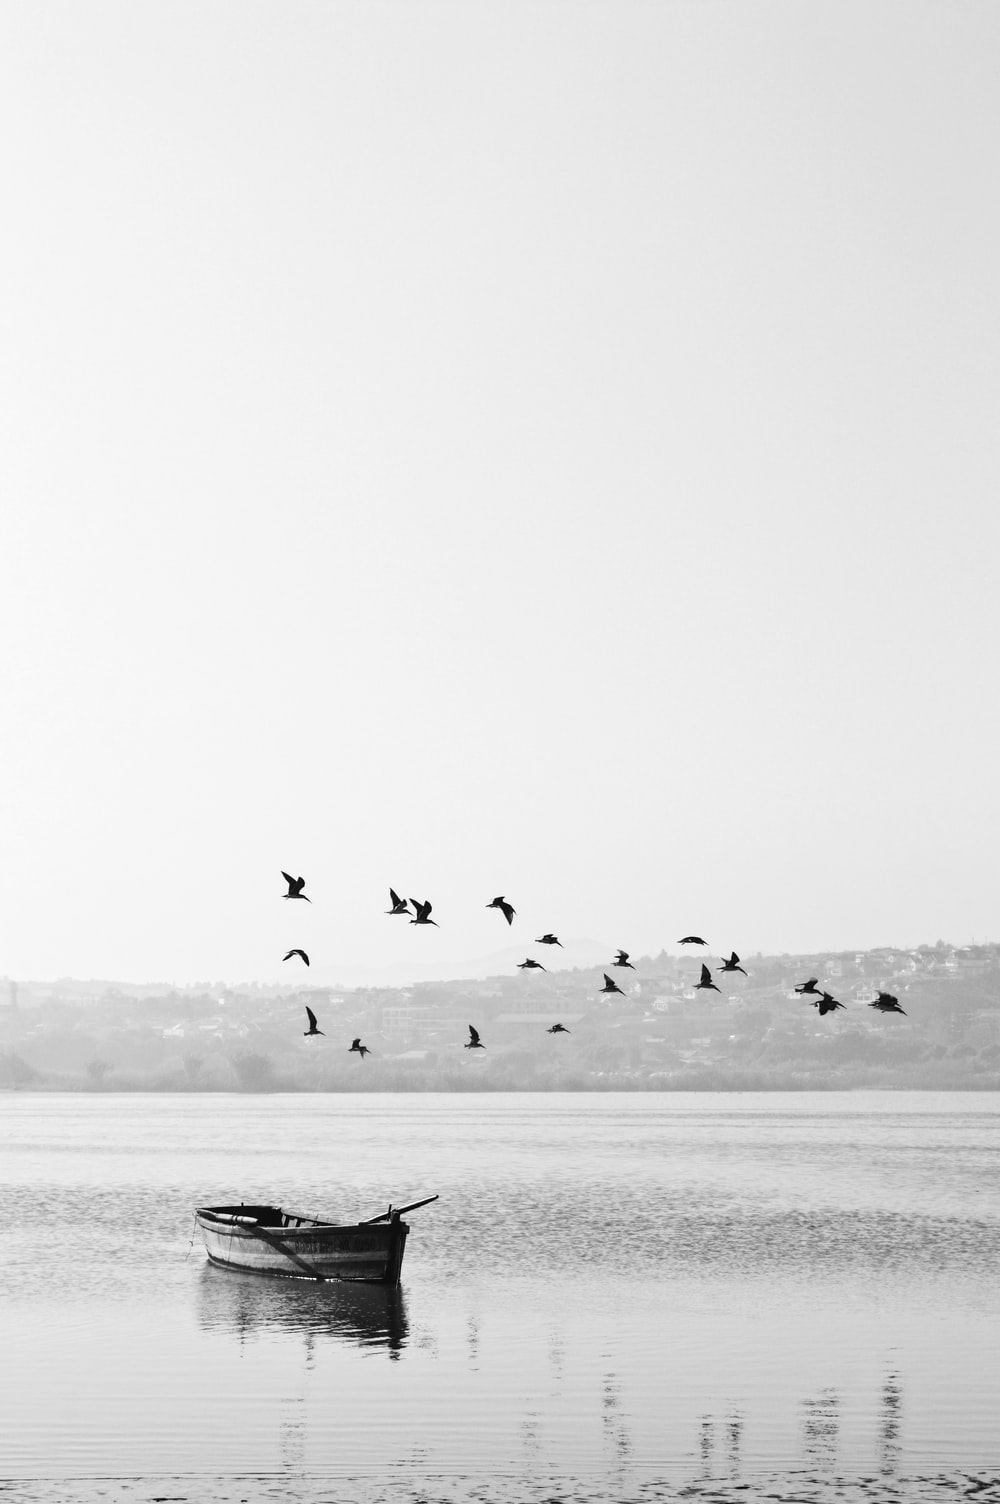 Black And White Landscape Picture. Download Free Image